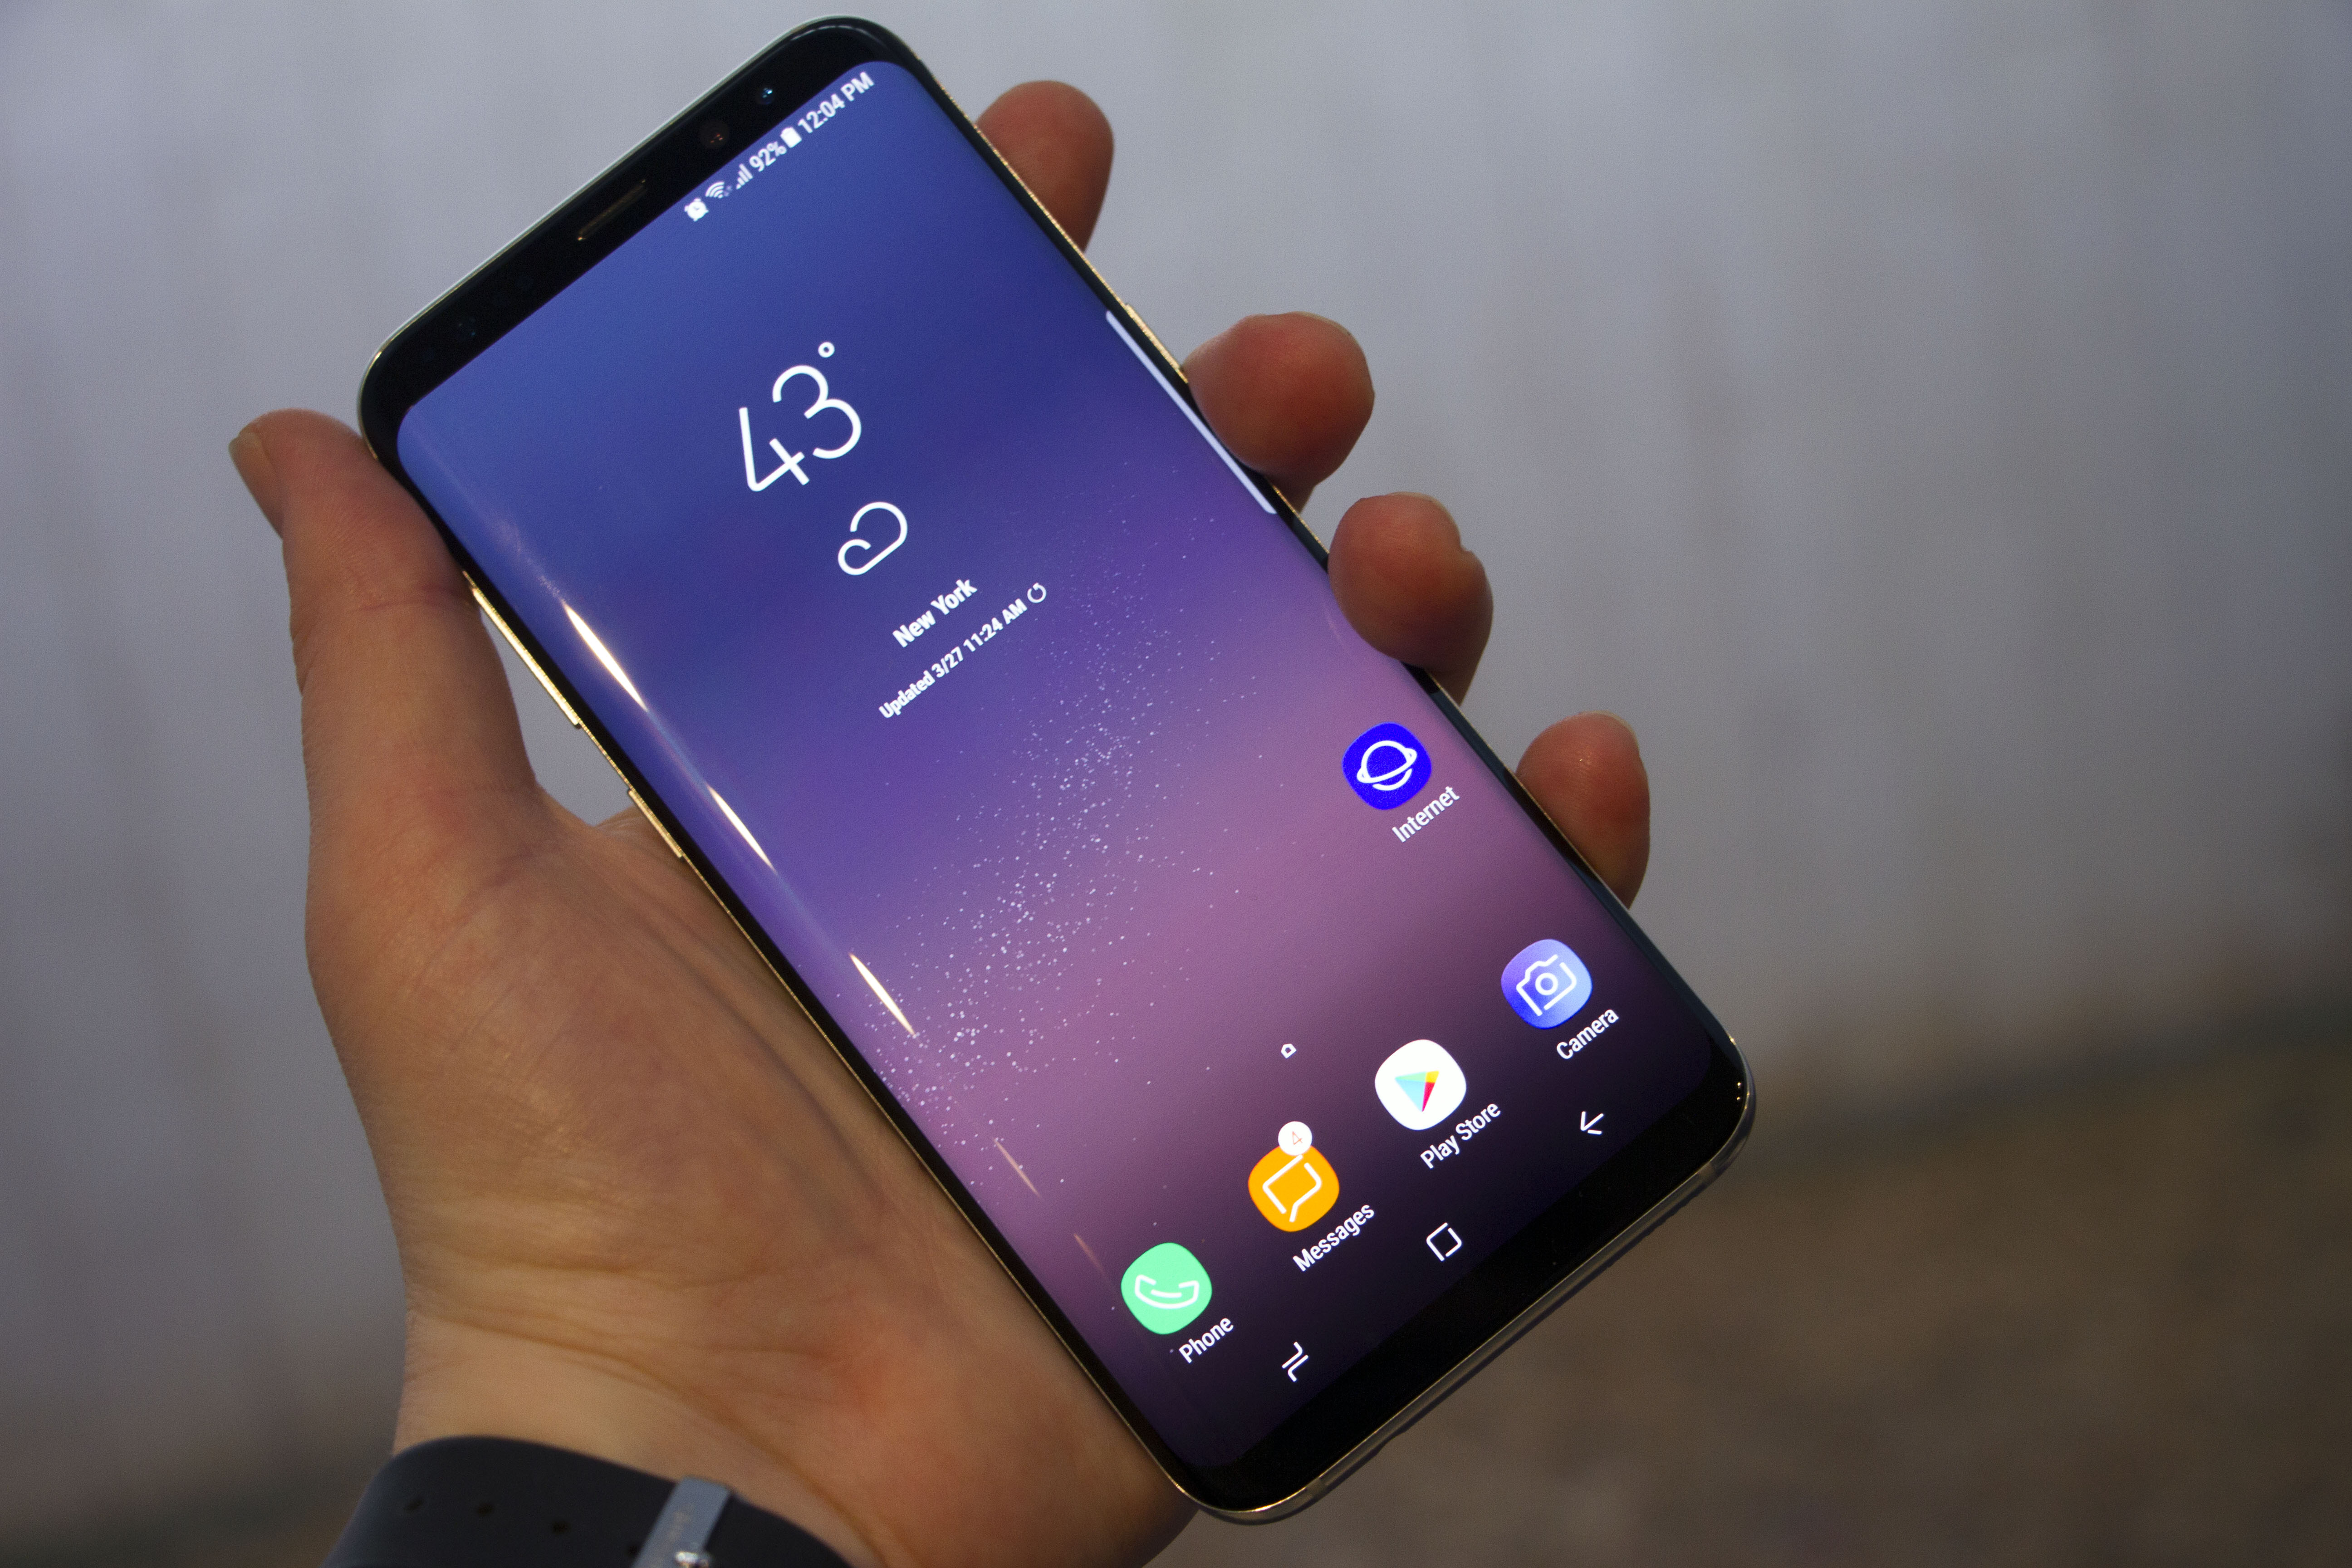 You can now buy an unlocked Samsung Galaxy S8 in the U.S. TechCrunch